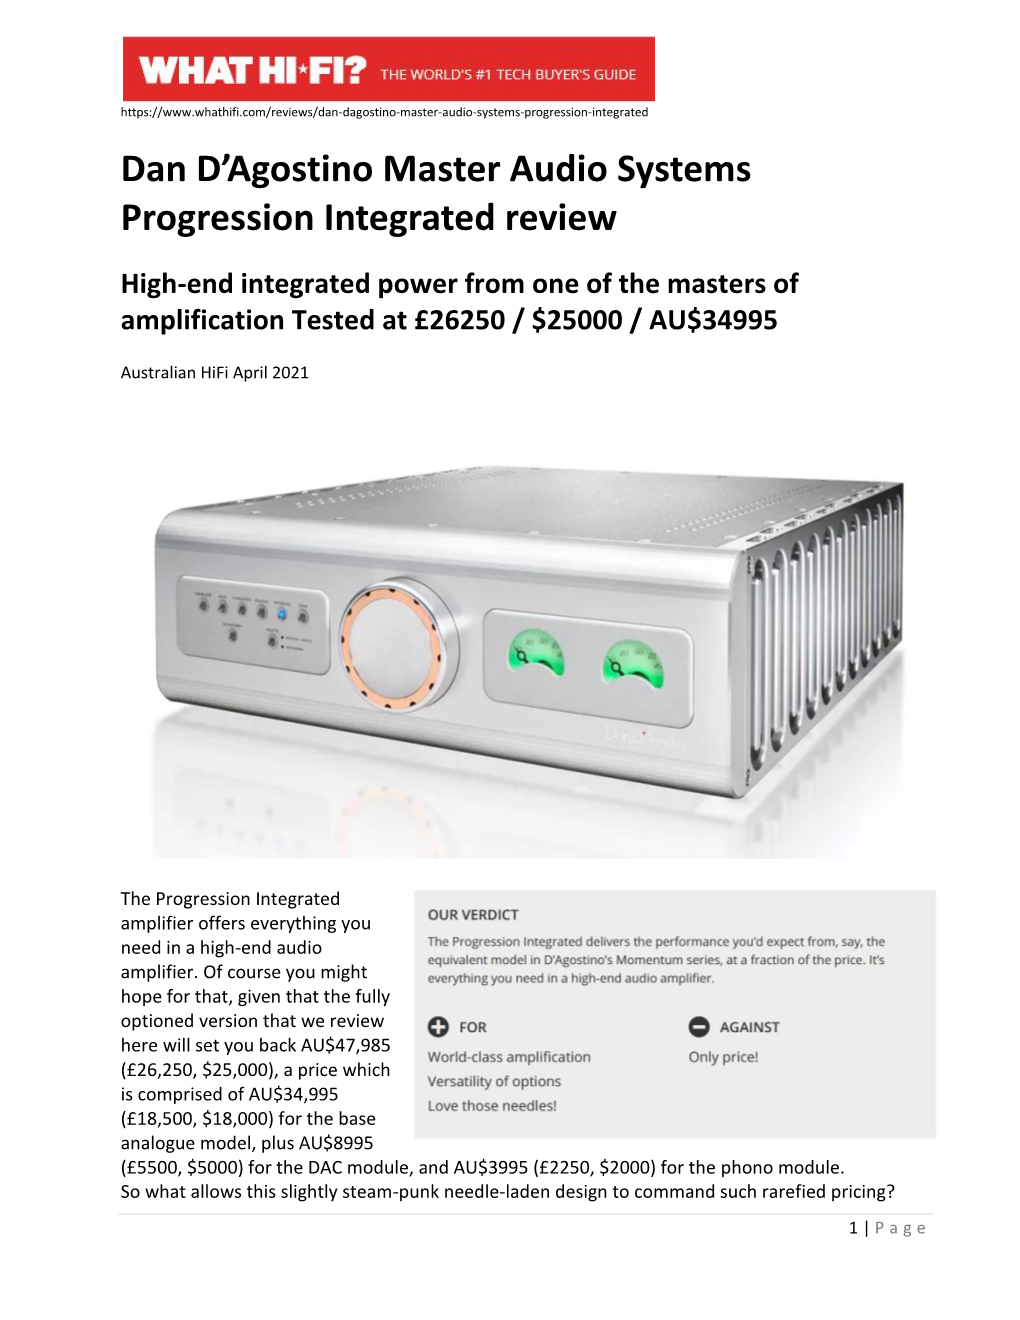 Dan D'agostino Master Audio Systems Progression Integrated Review